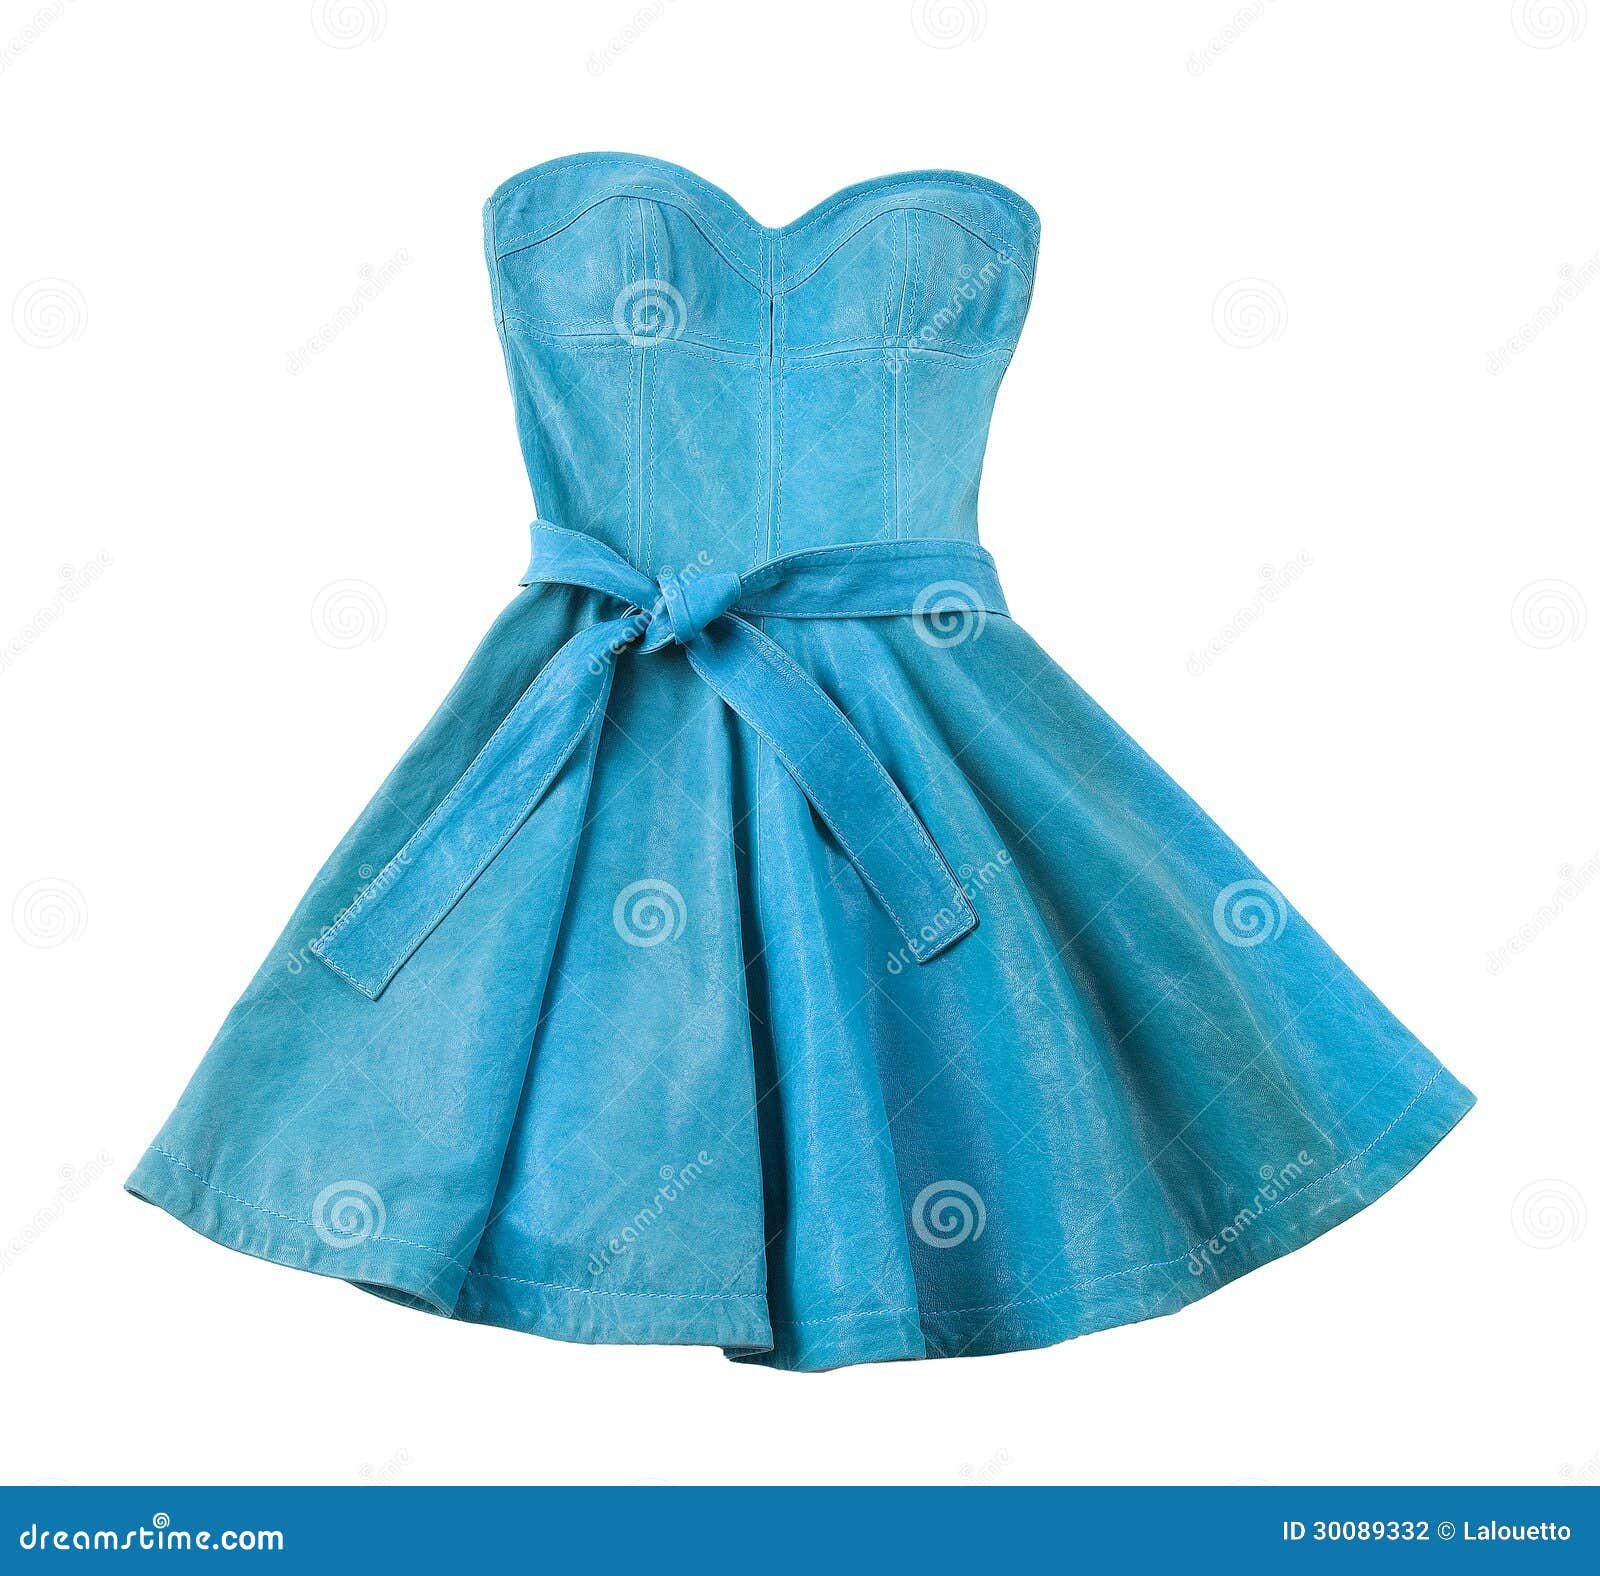 Turquoise Leather Evase Strapless Belted Dress Stock Photo - Image of ...